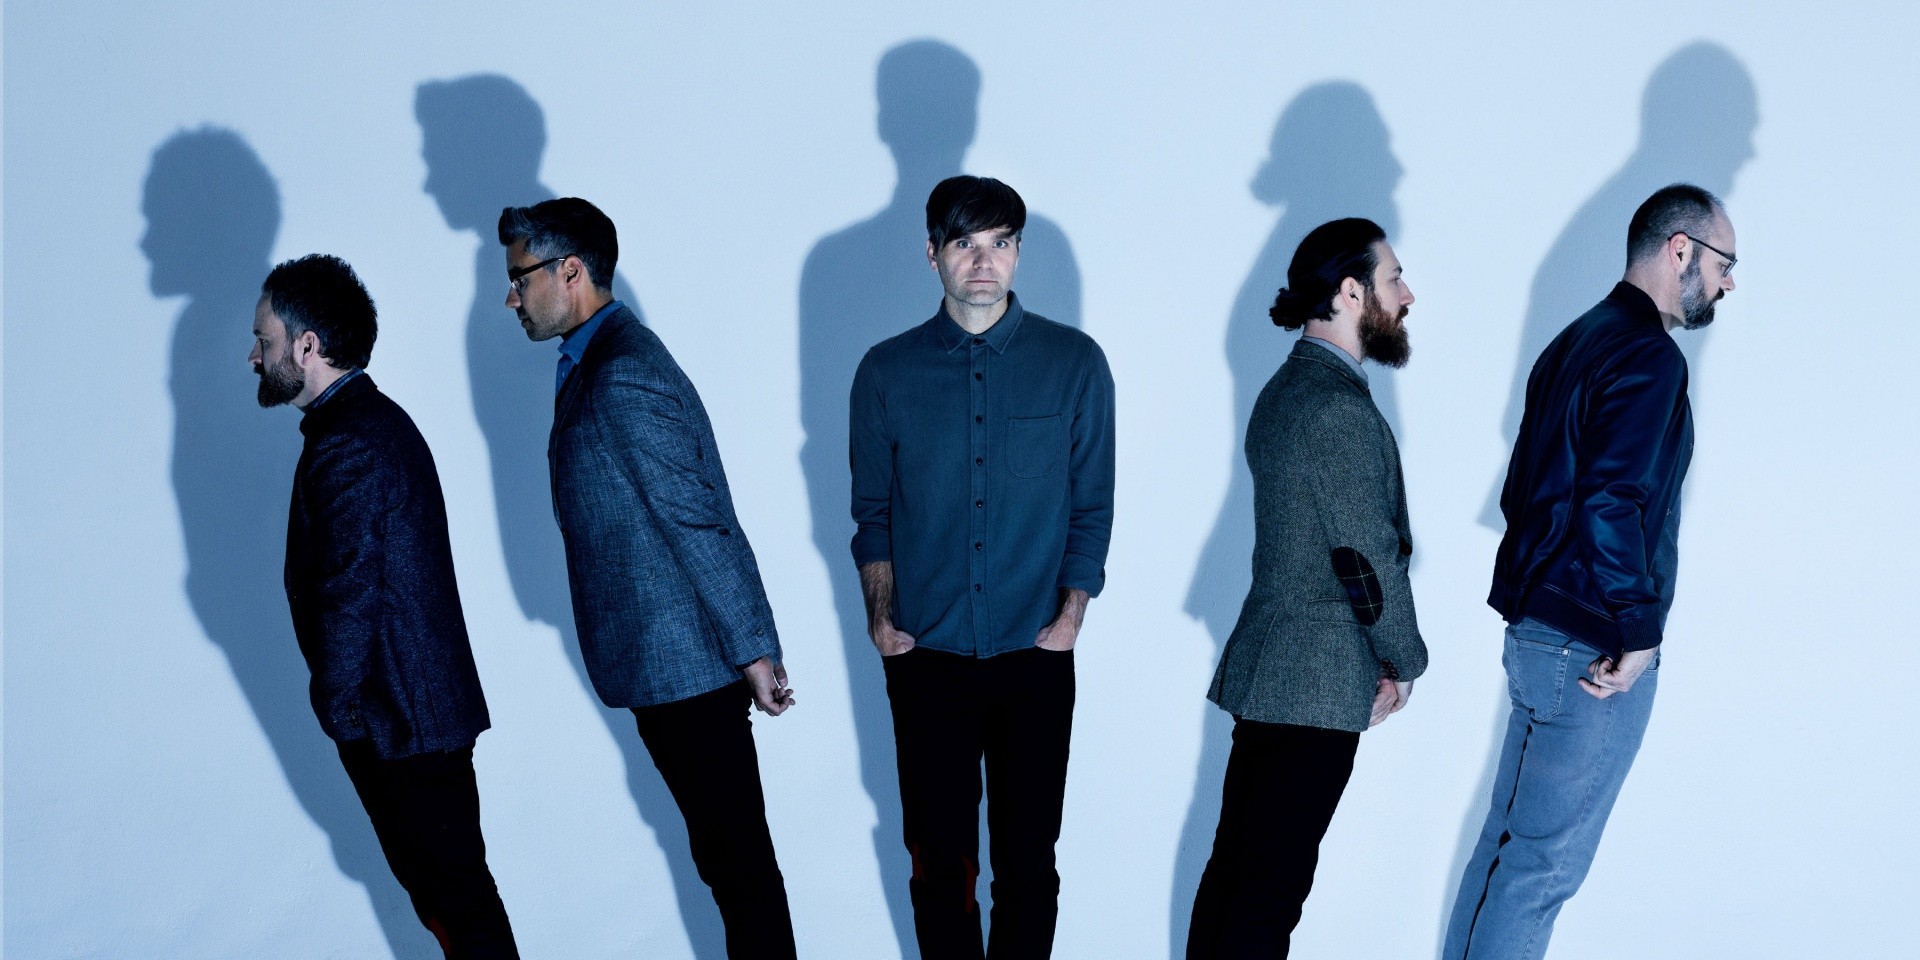 Death Cab For Cutie's new album Thank You For Today is now streaming - listen